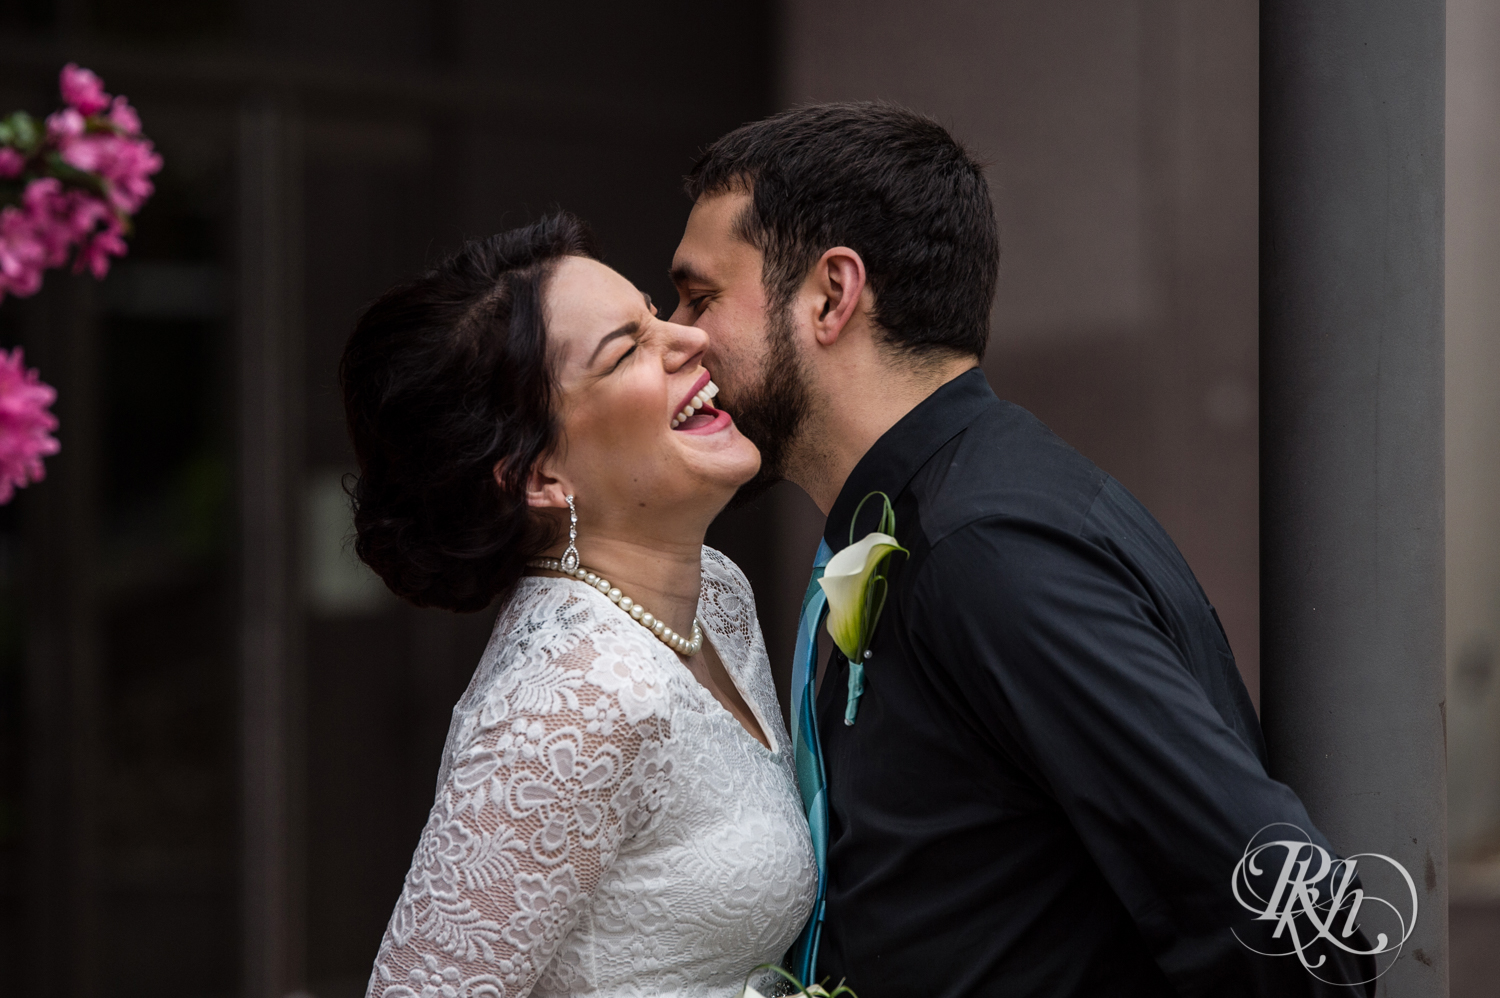 Bride and groom share first look in Minneapolis, Minnesota before their courthouse wedding.